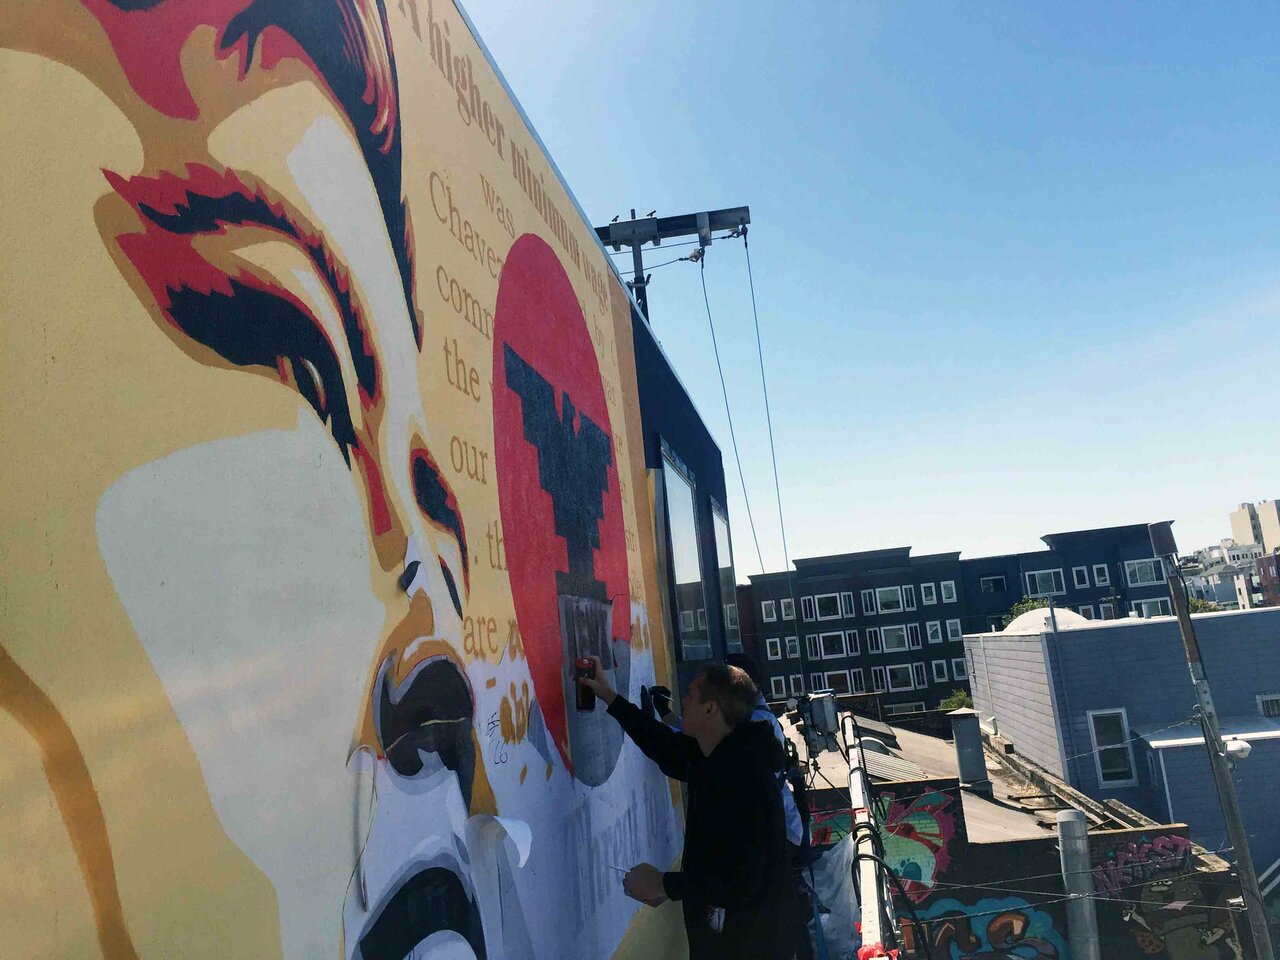 Workers' RIghts #mural in-progress to coincide with #AmericanCivics @SFAE. #CesarChavez #ObeyGiant #Obey https://t.co/EthOHQG65n